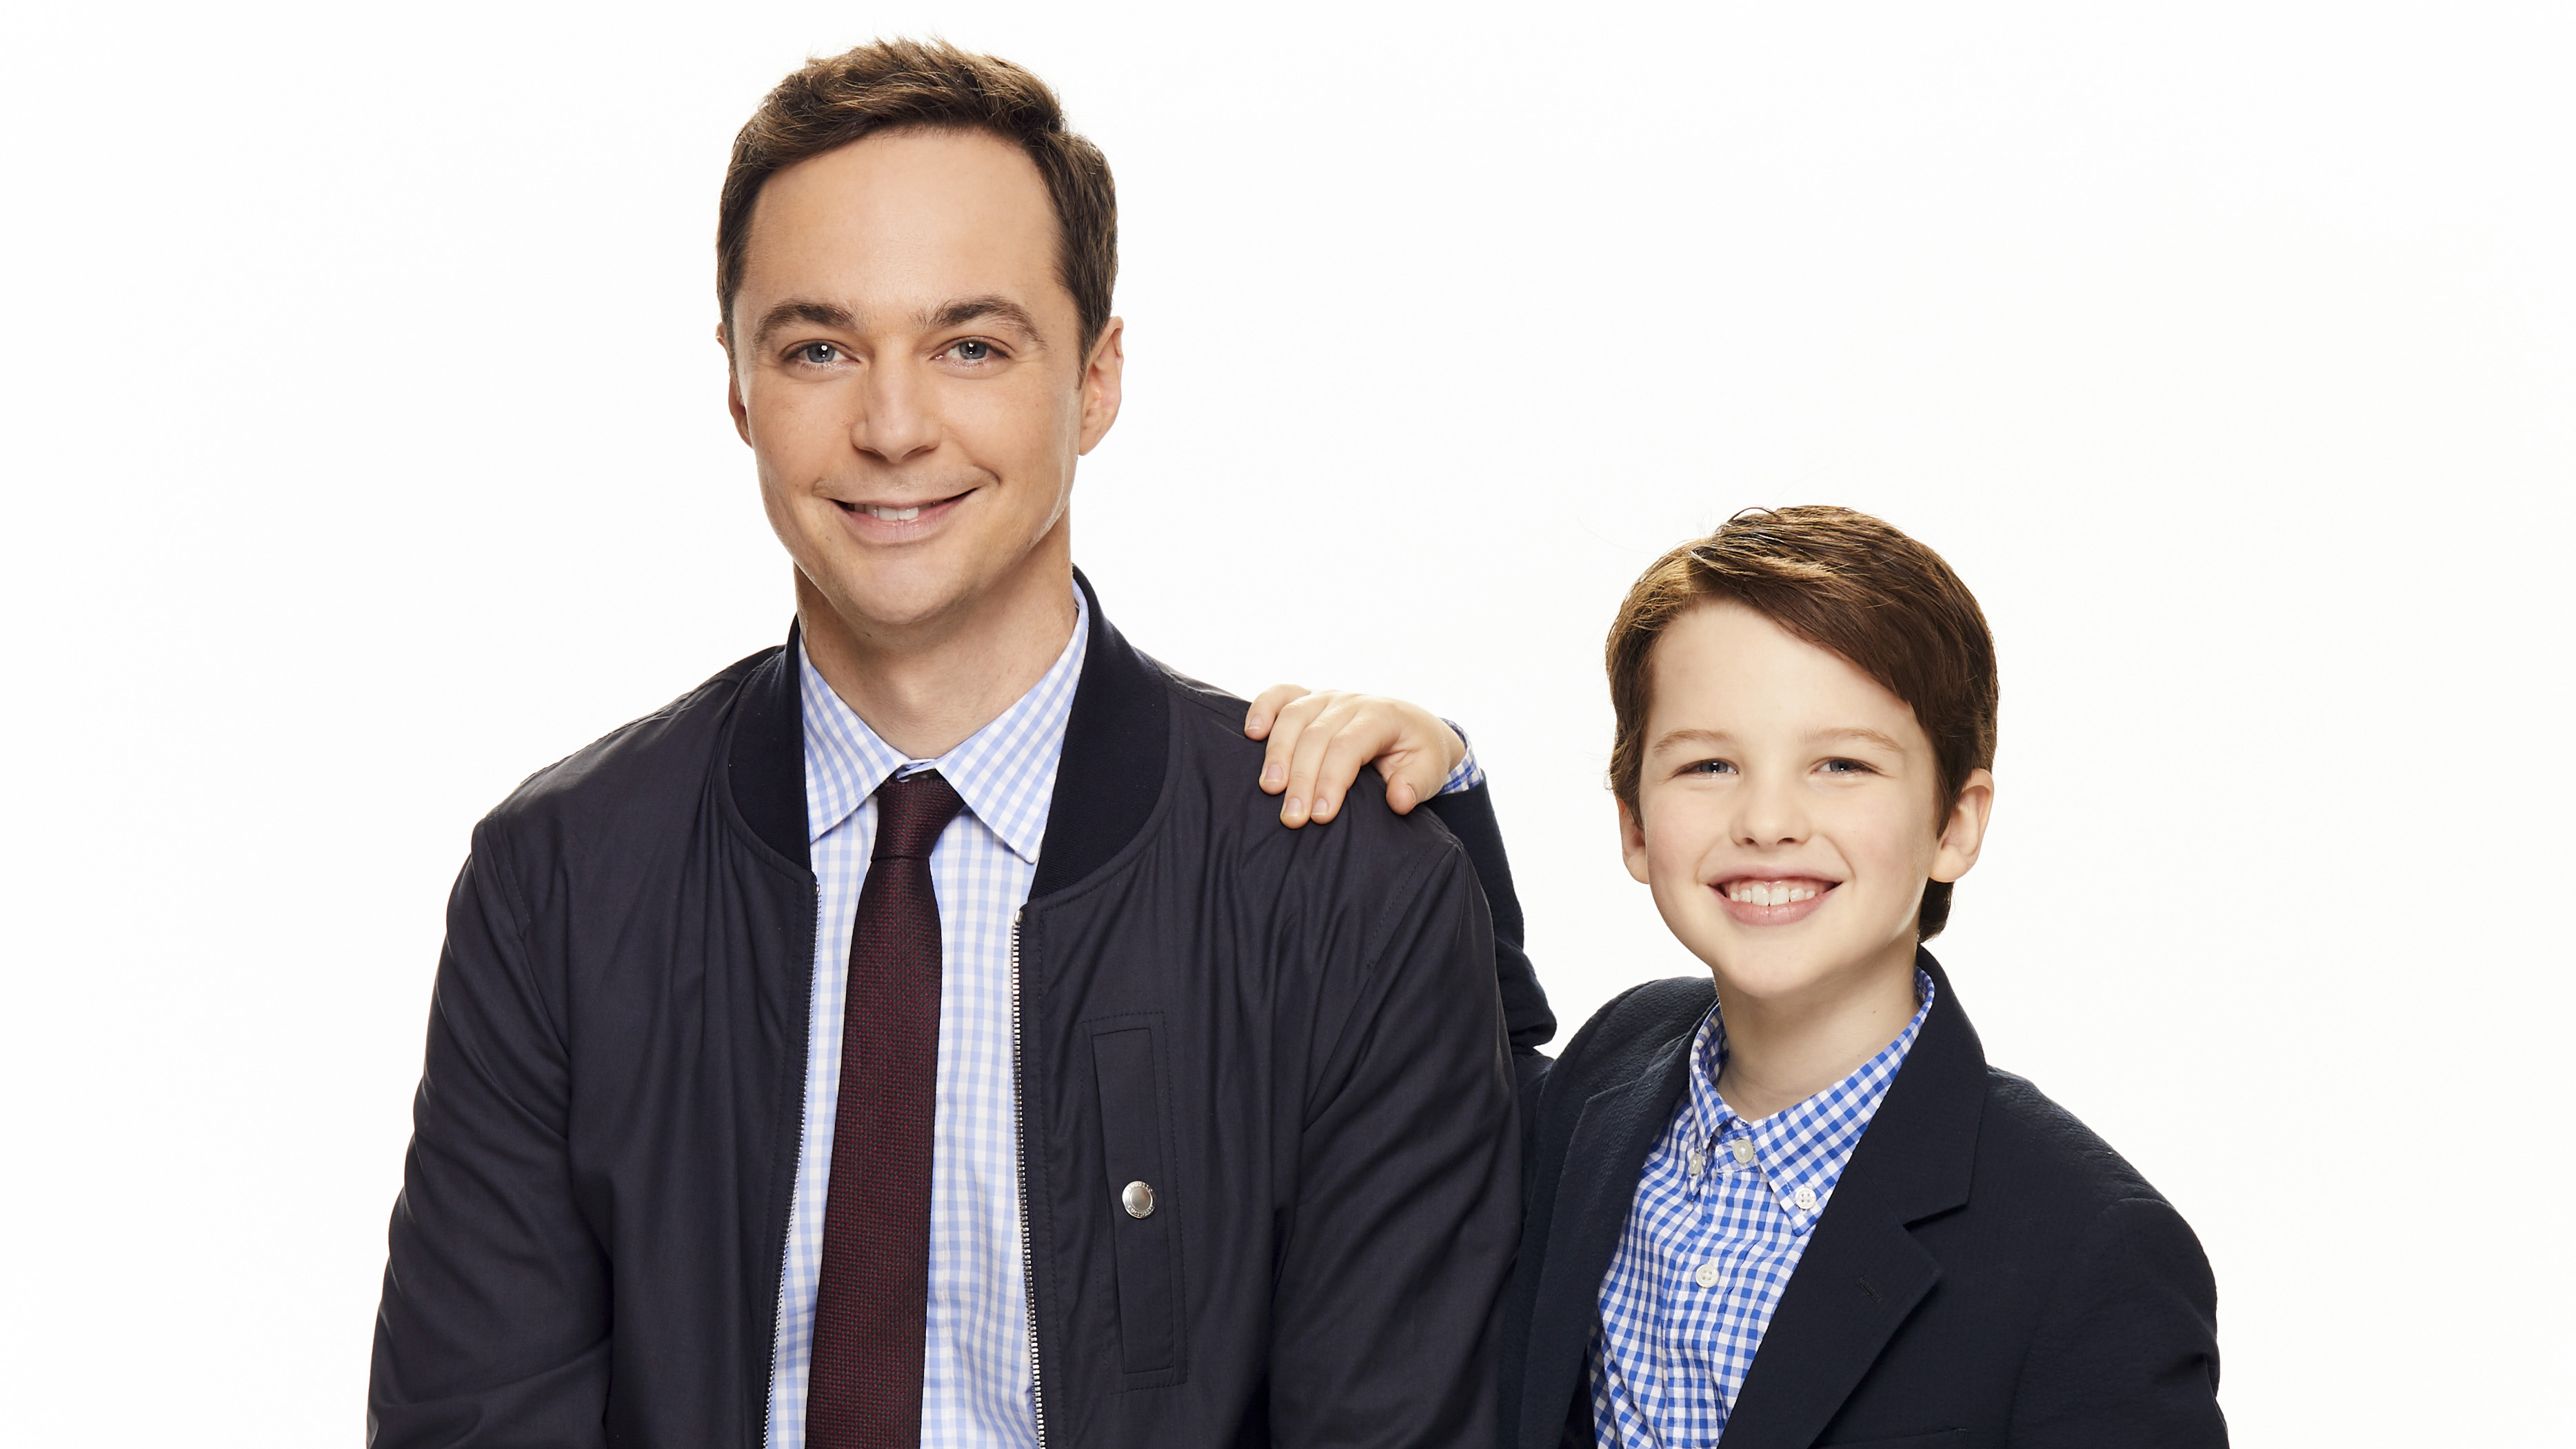 Jim Parsons And Young Sheldon, HD Tv Shows, 4k Wallpaper, Image